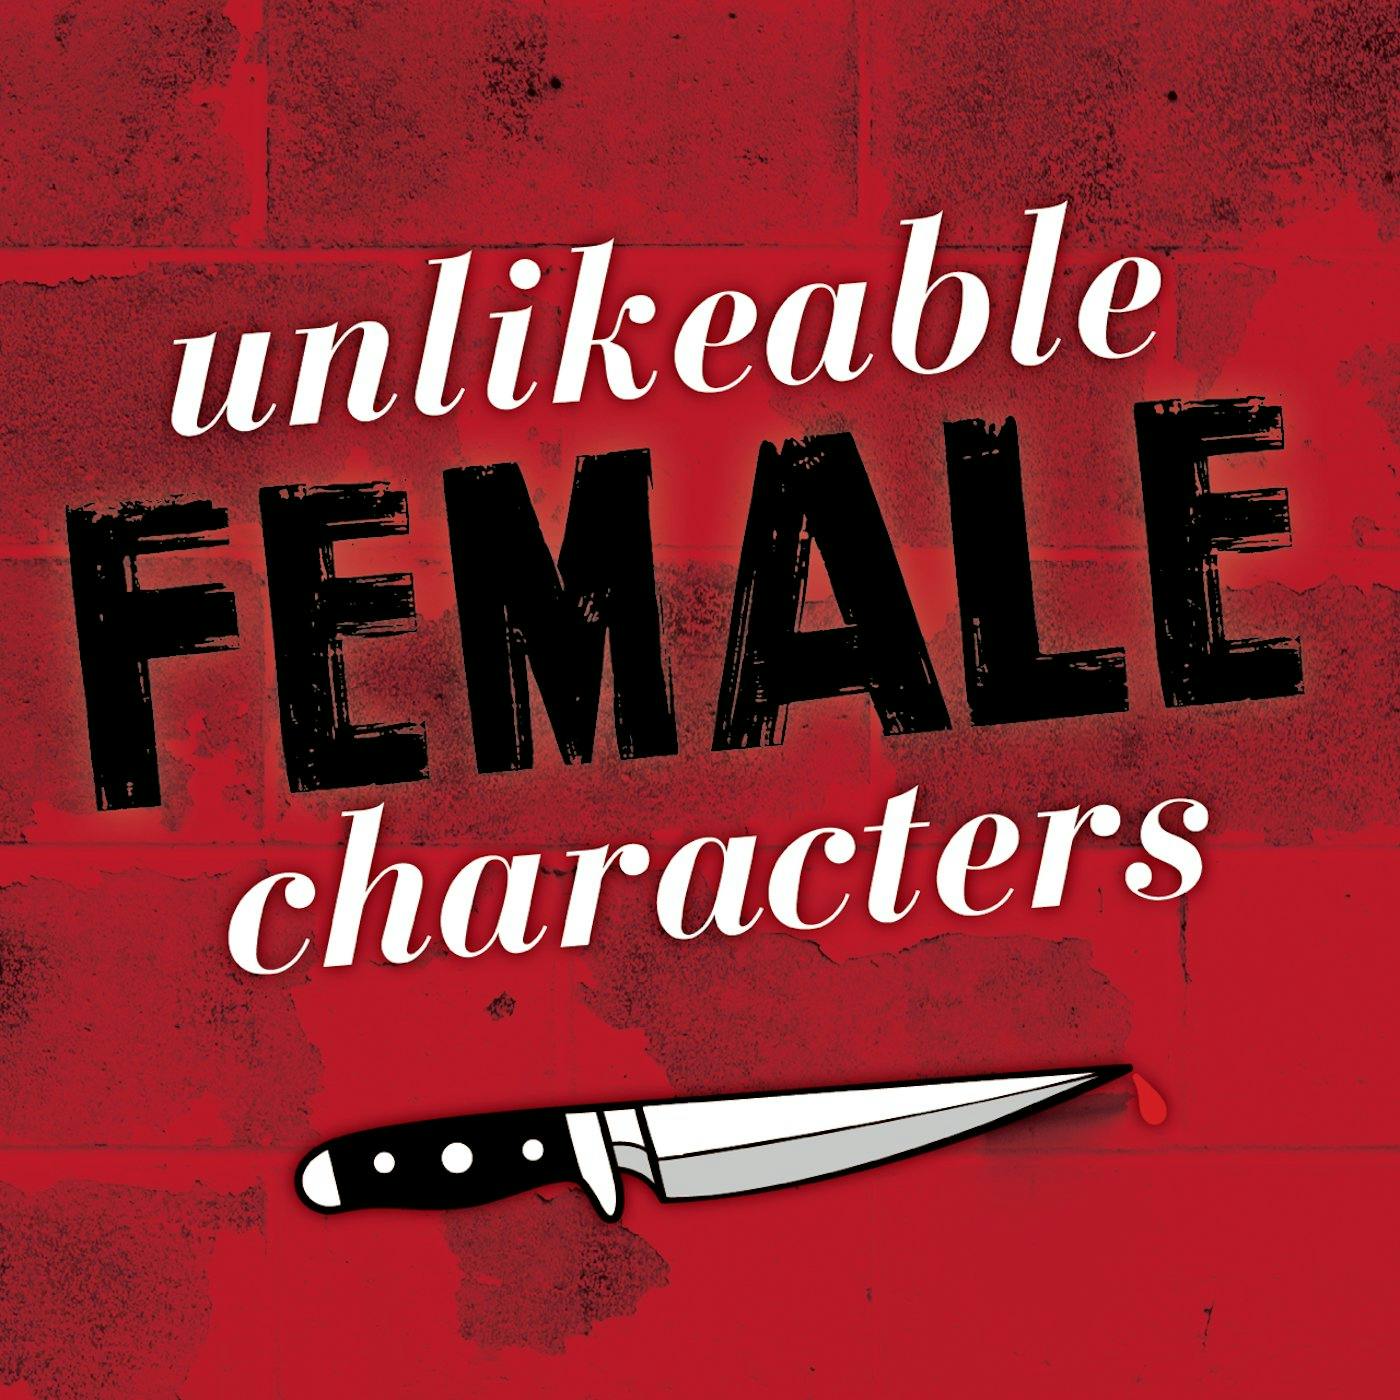 Episode 1: Favorite Unlikeable Female Characters